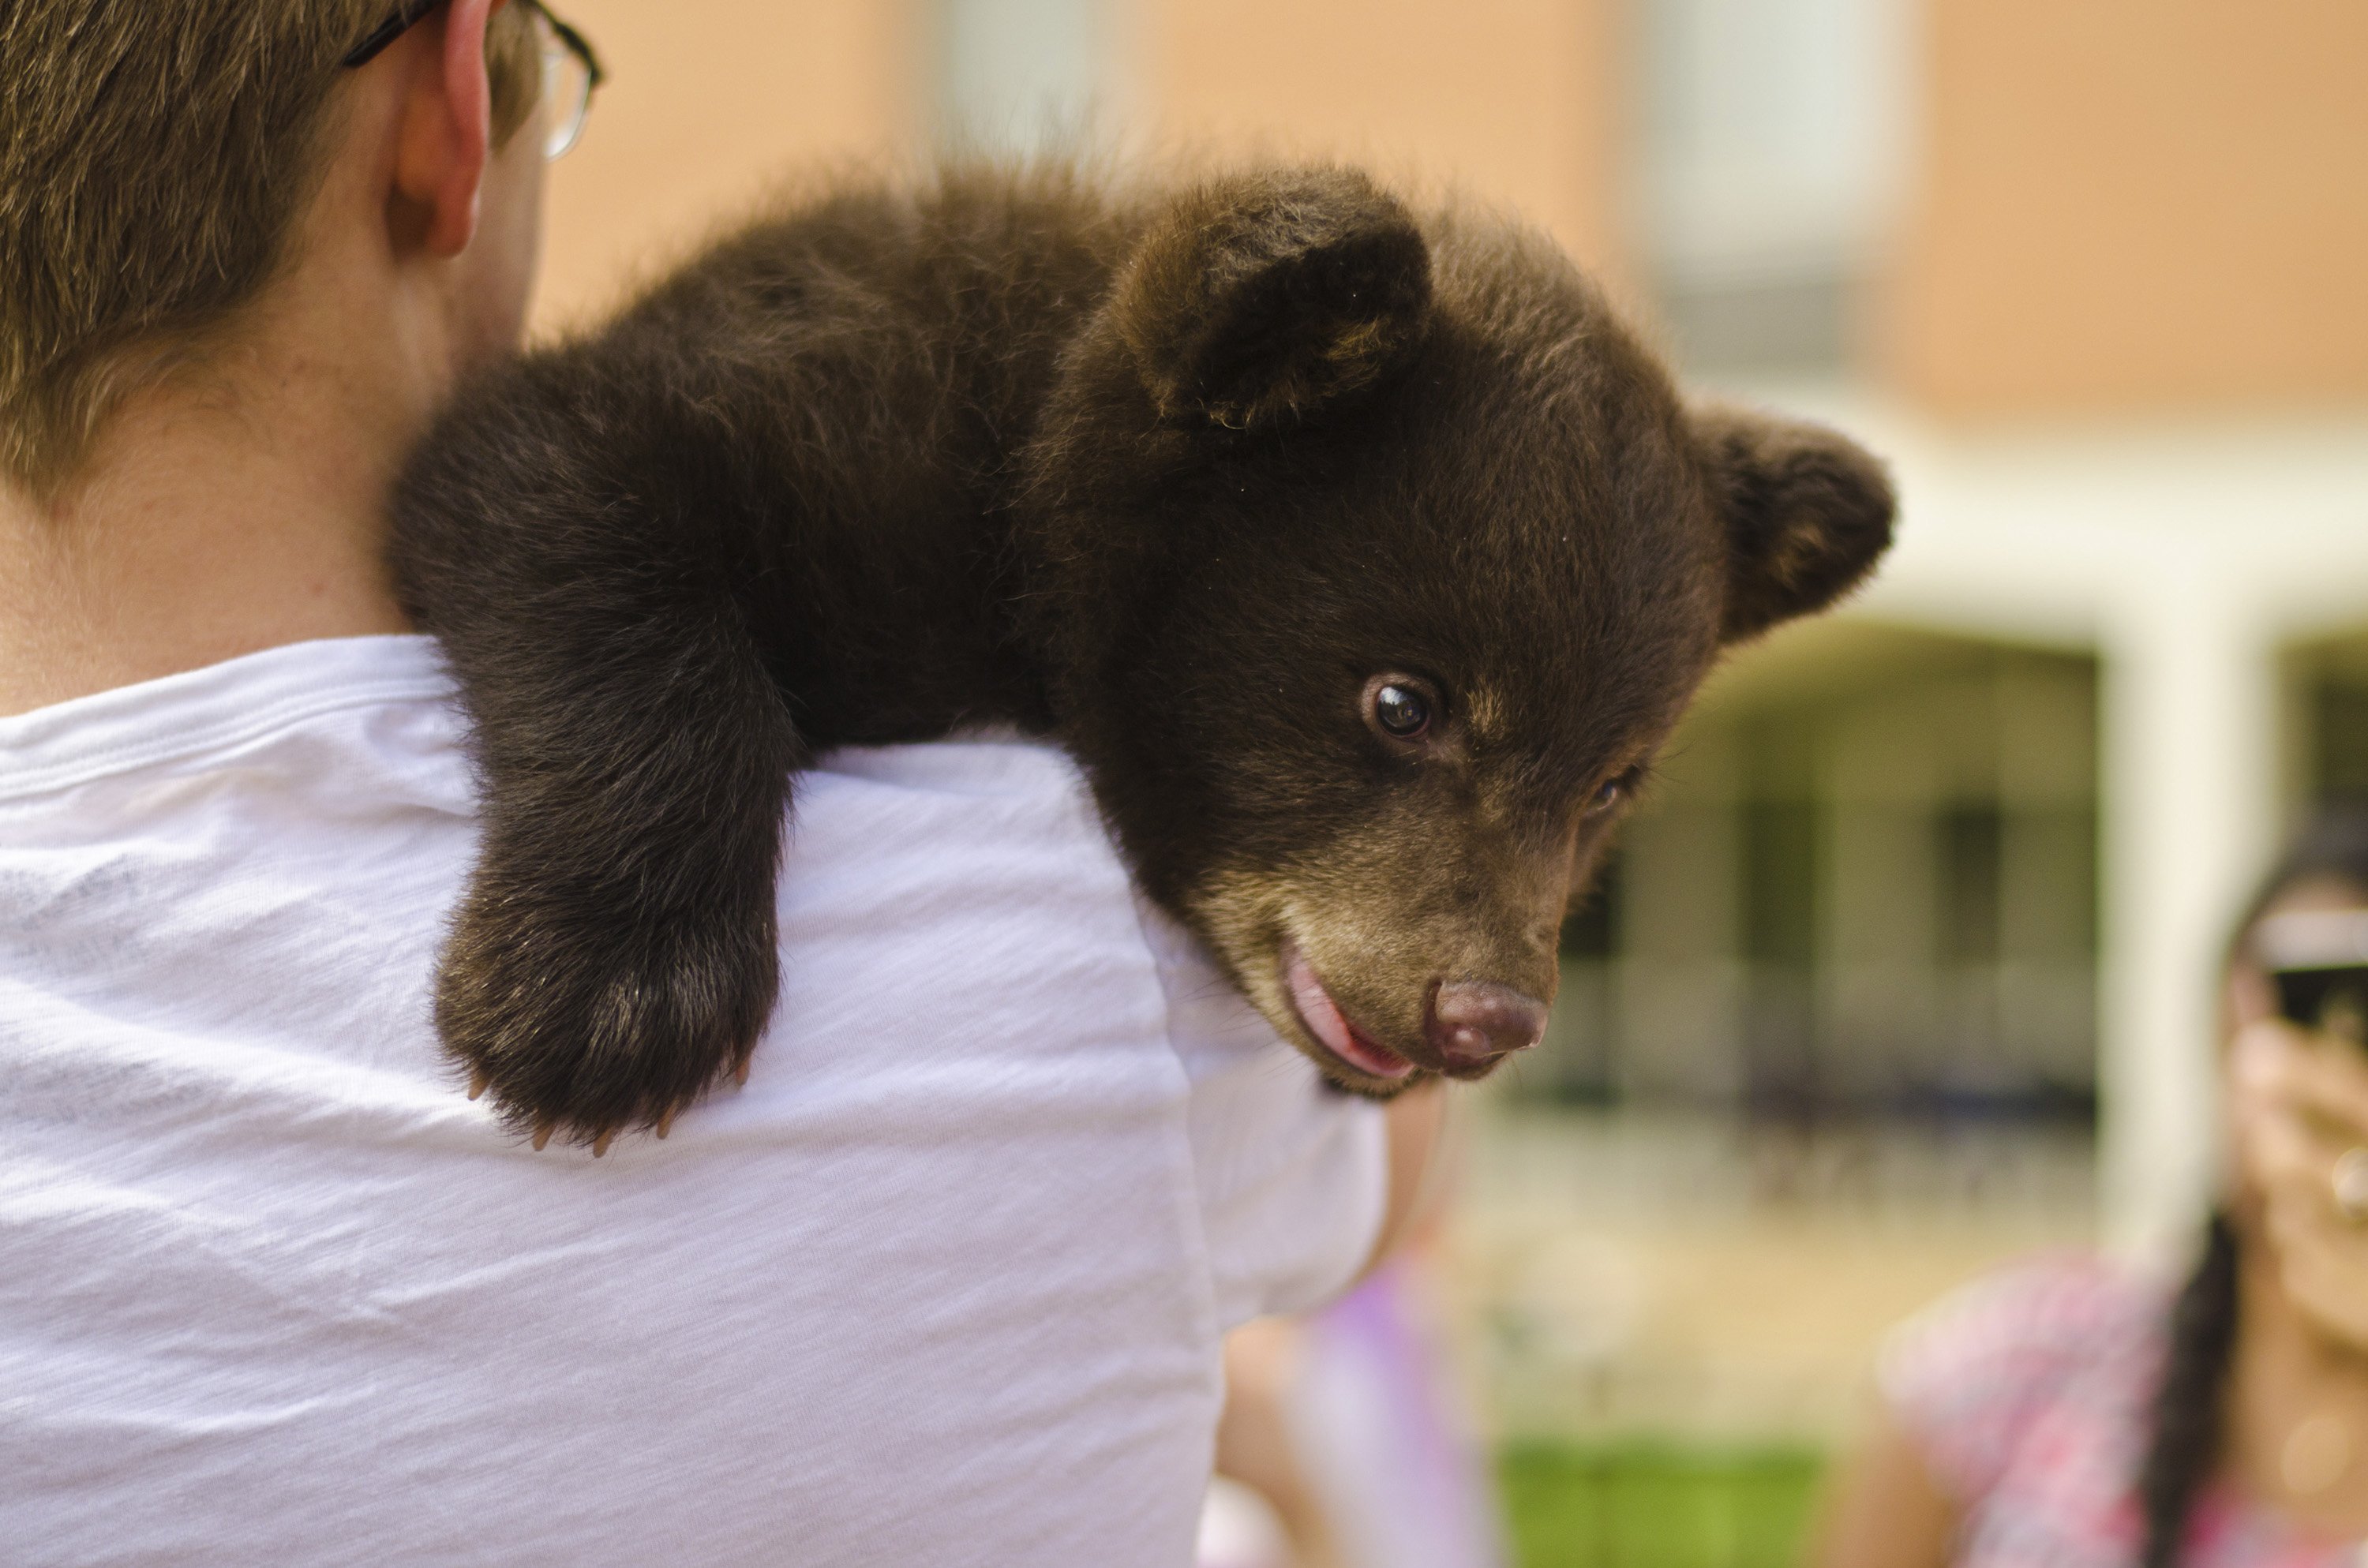 Handout picture of a two-month-old bear cub named Boo Boo held by a student at Washington University in St. Louis